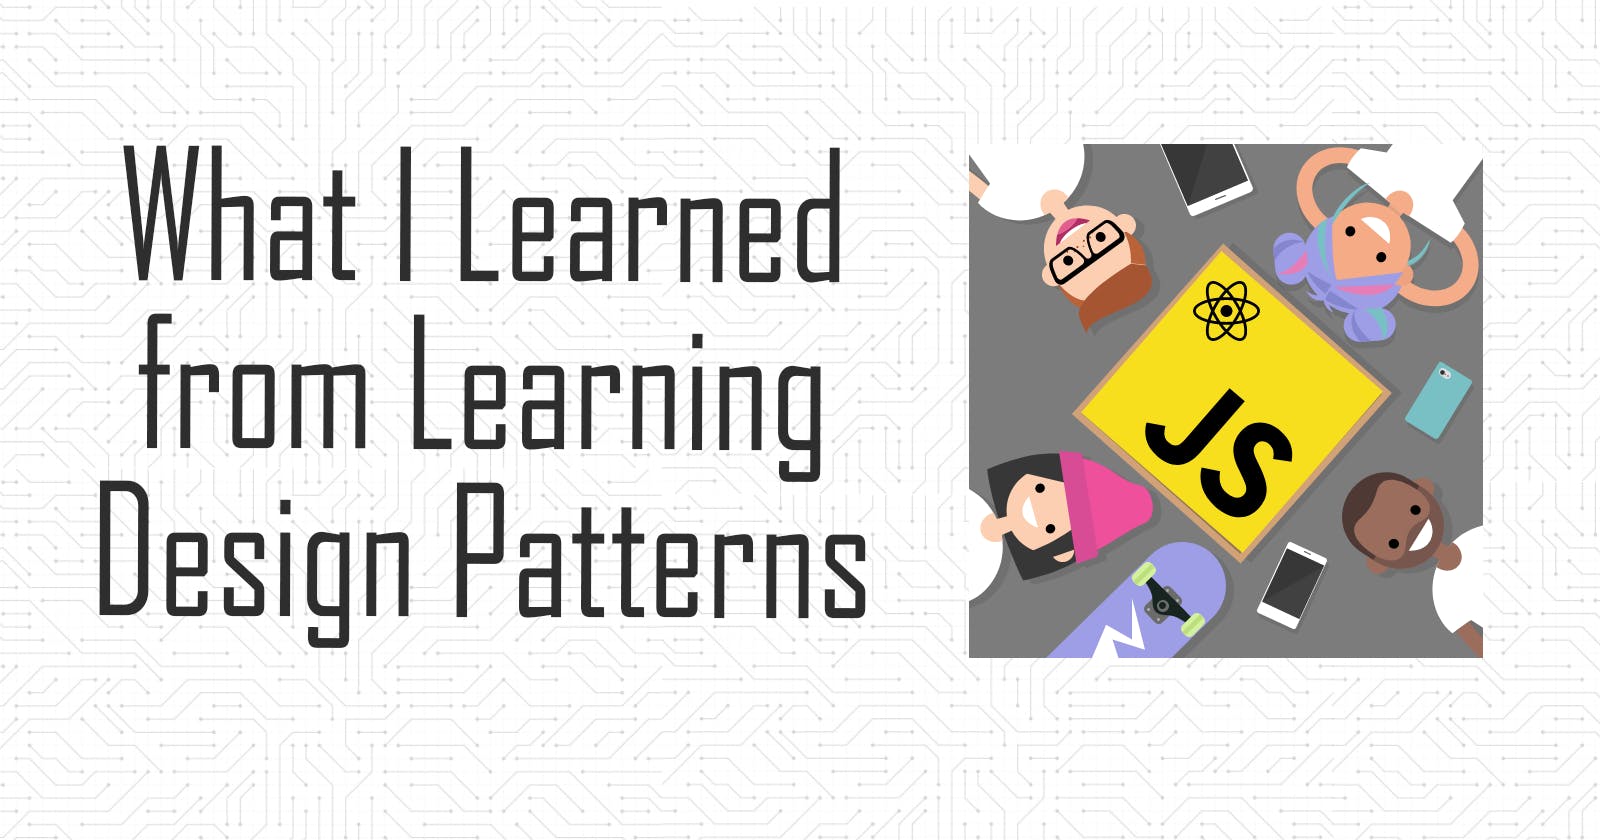 Learning Design Patterns: A Summary